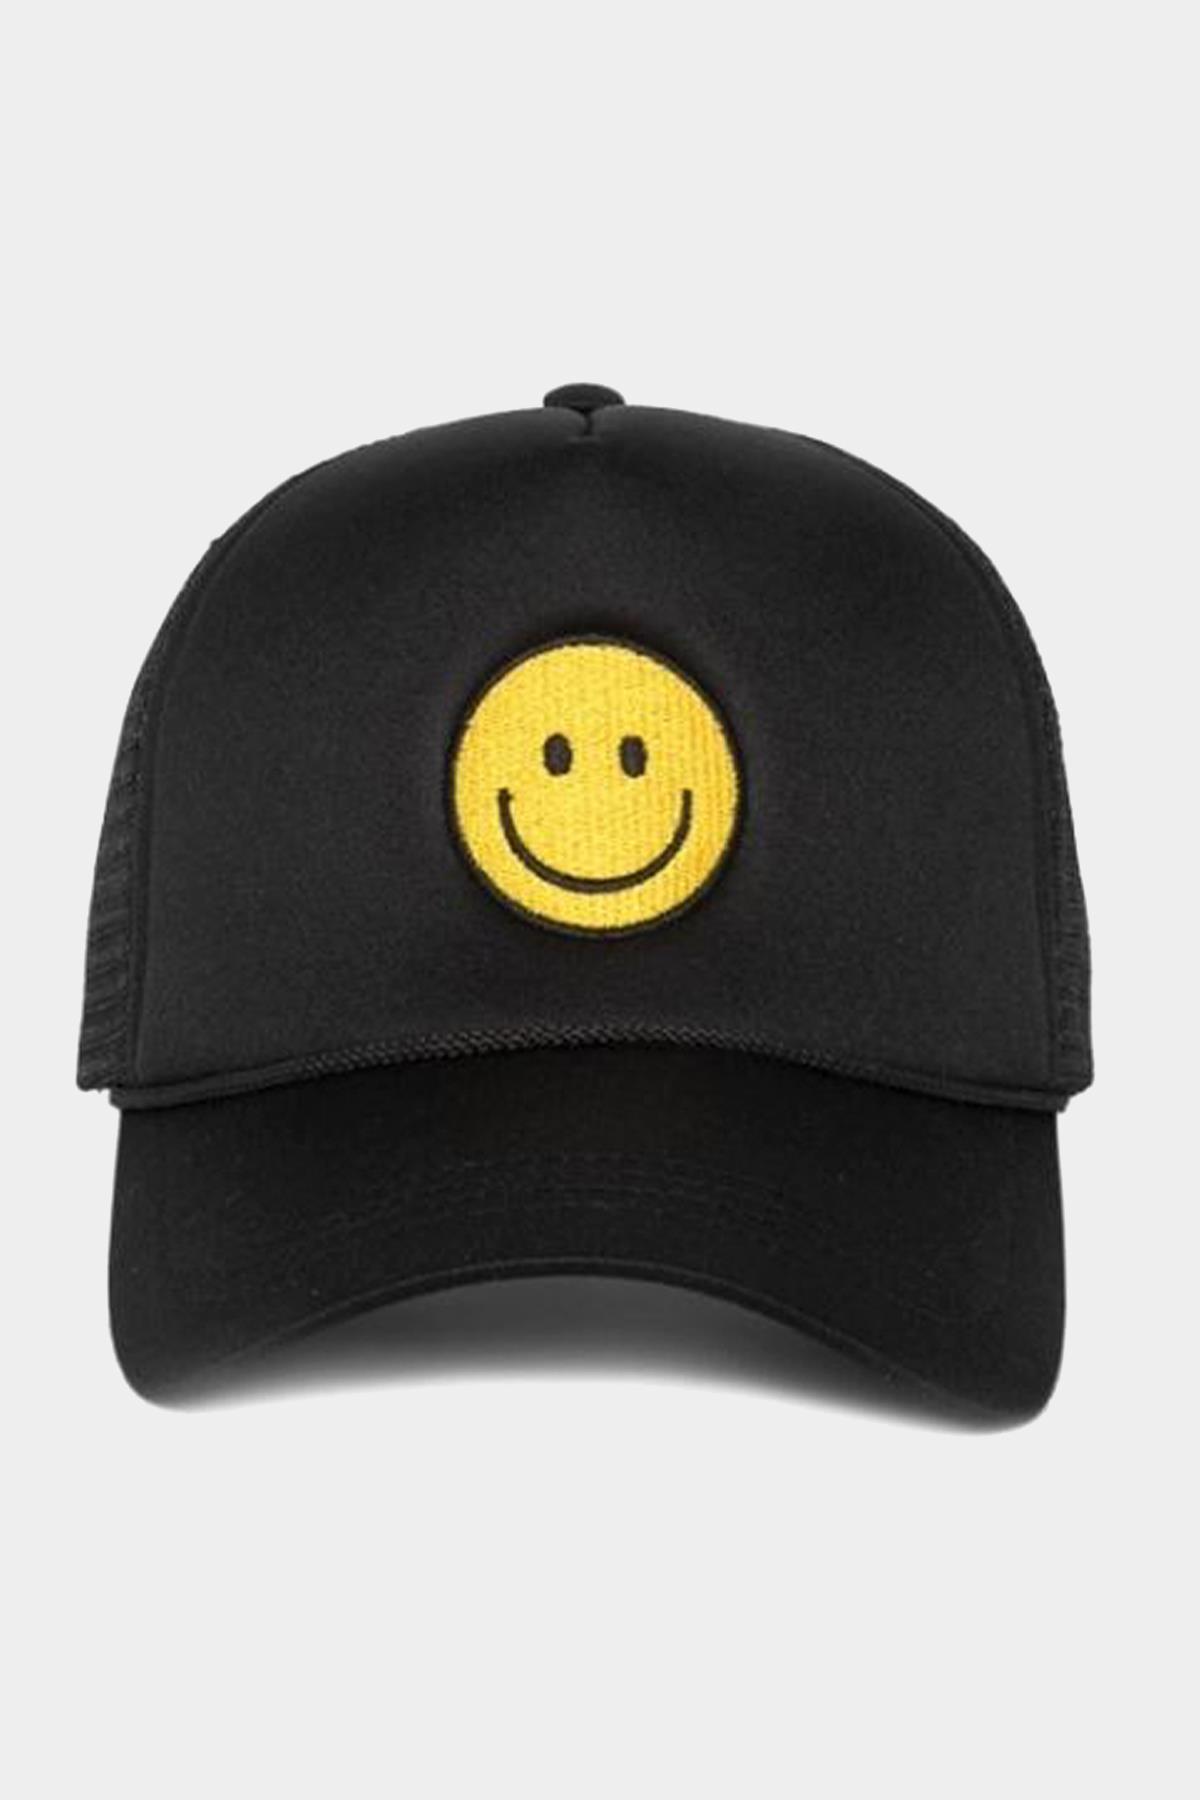 HAPPY FACE EMBROIDERED MESH BACK TRUCKER CAP